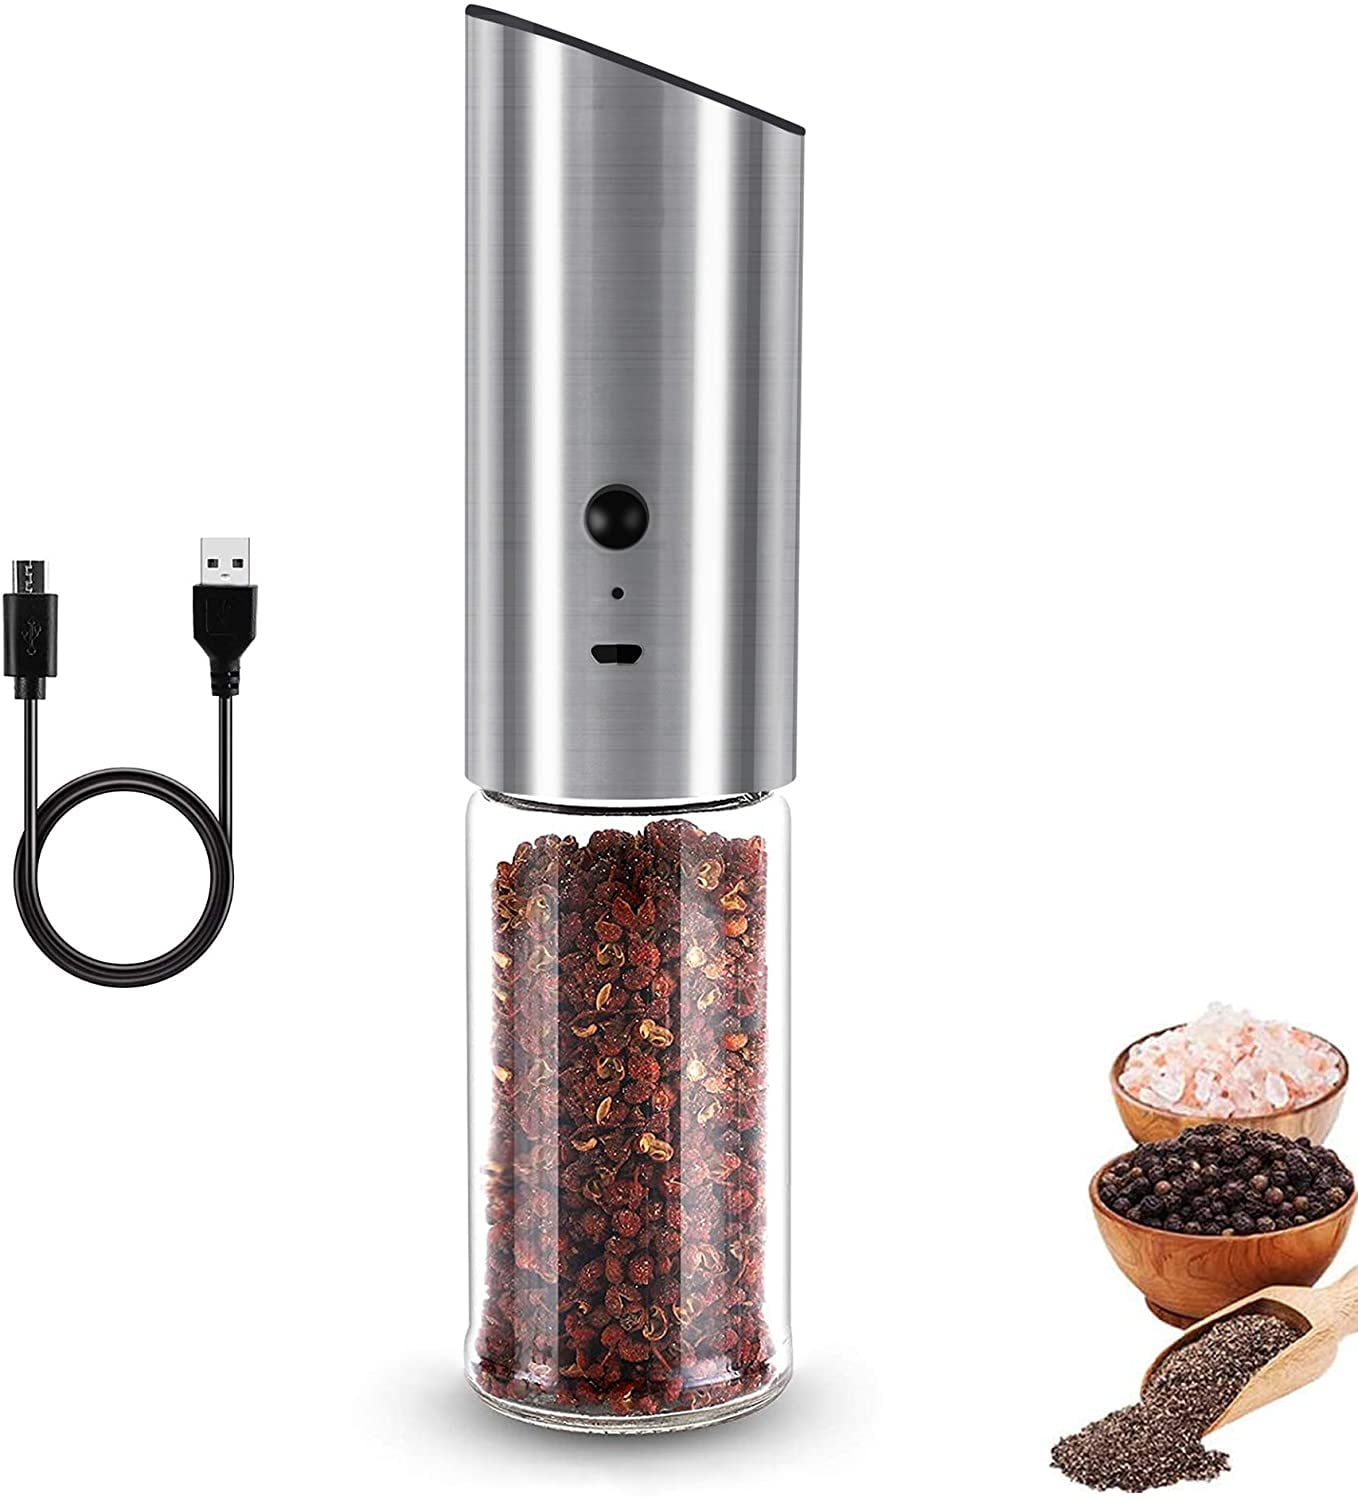 Electric Salt and Pepper Grinder,USB Rechargeable Pepper Grinder or pepper mill with LED light,Gravity Automatic Salt & Pepper Mill with Adjustable Coarseness,New Upgrade